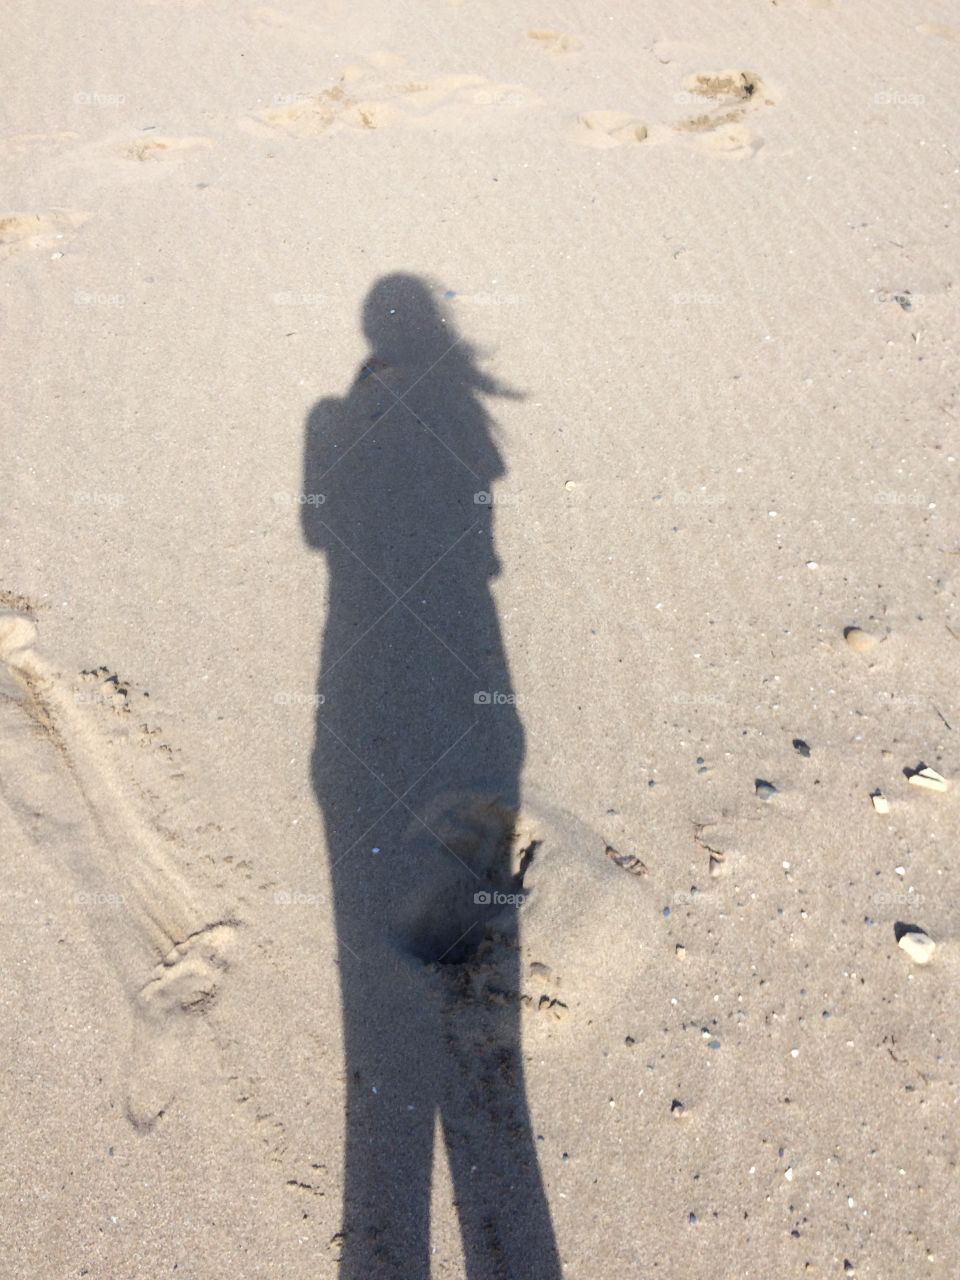 This is a fun photo I took on the beach. The smooth sand looks perfect with a nice touch of a shadow. 